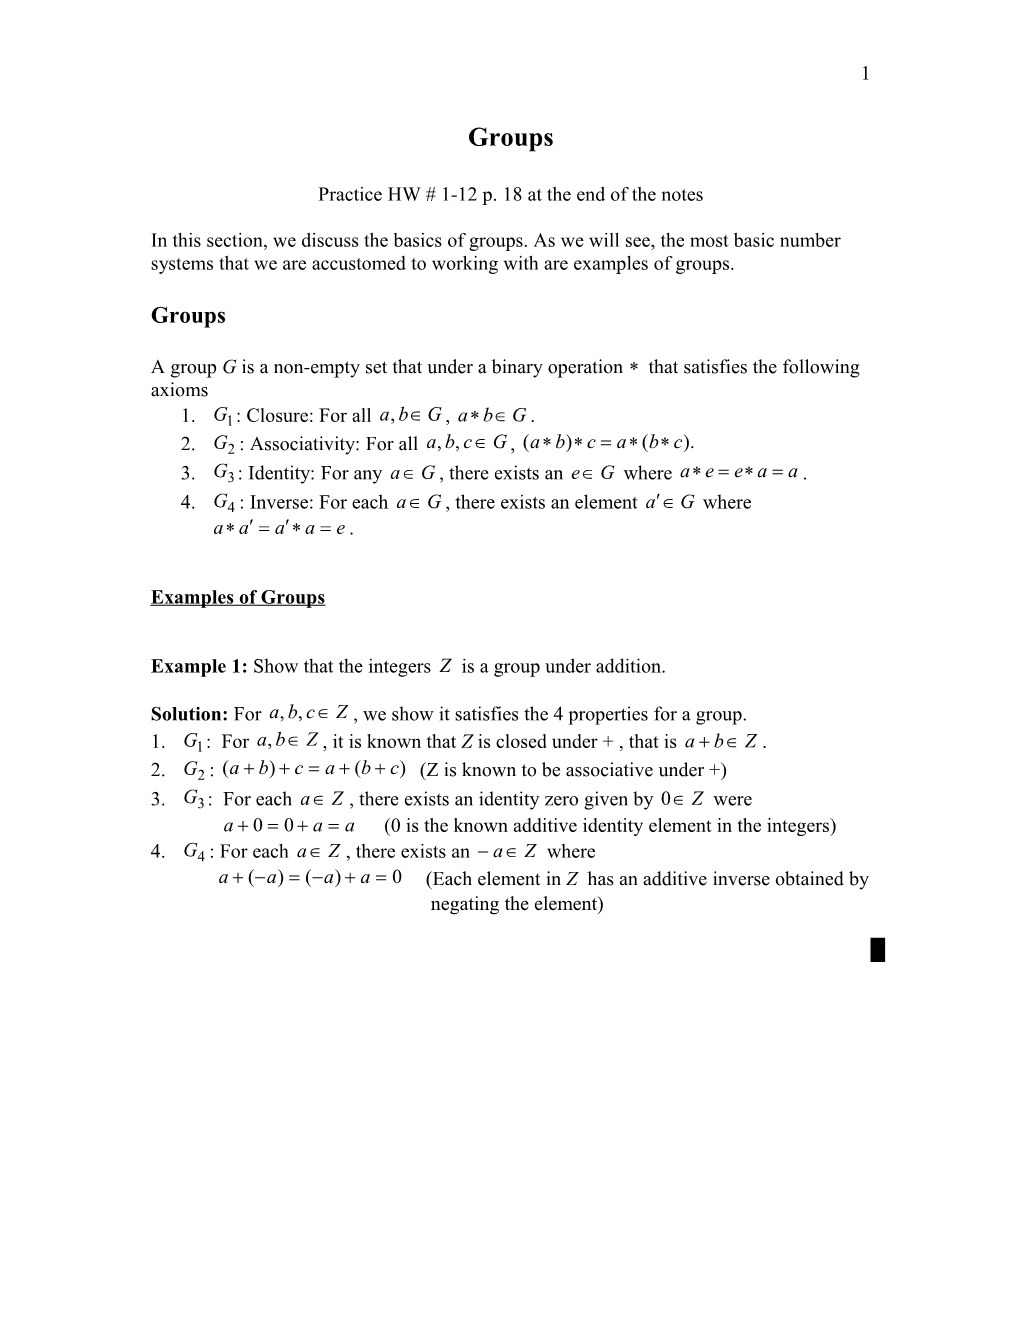 Practice HW # 1-12 P. 18 at the End of the Notes